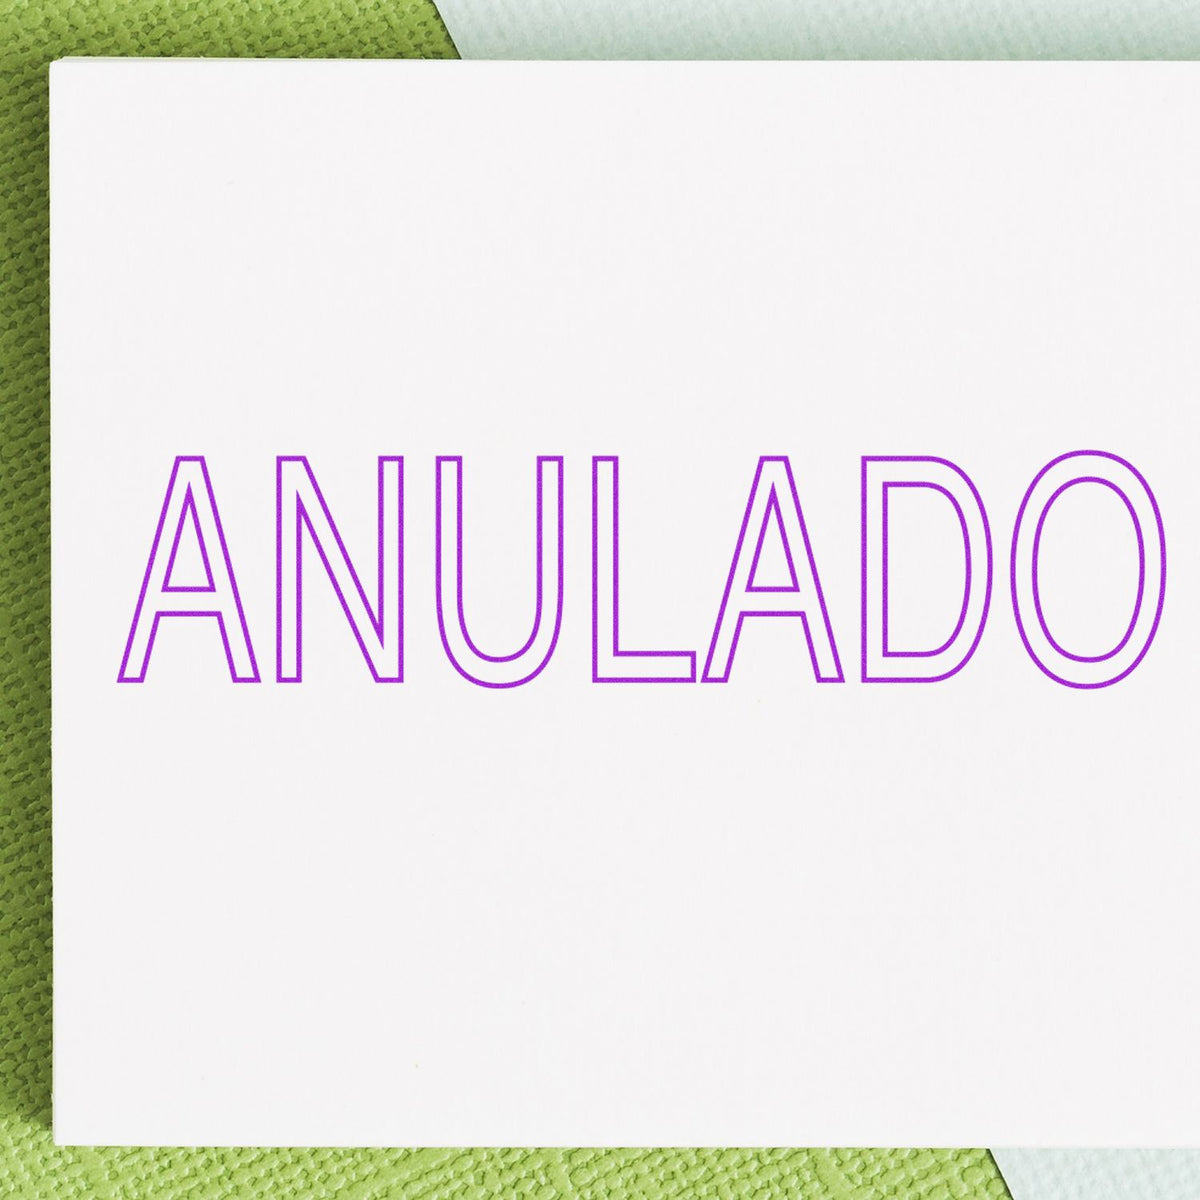 Large Outline Anulado Rubber Stamp In Use